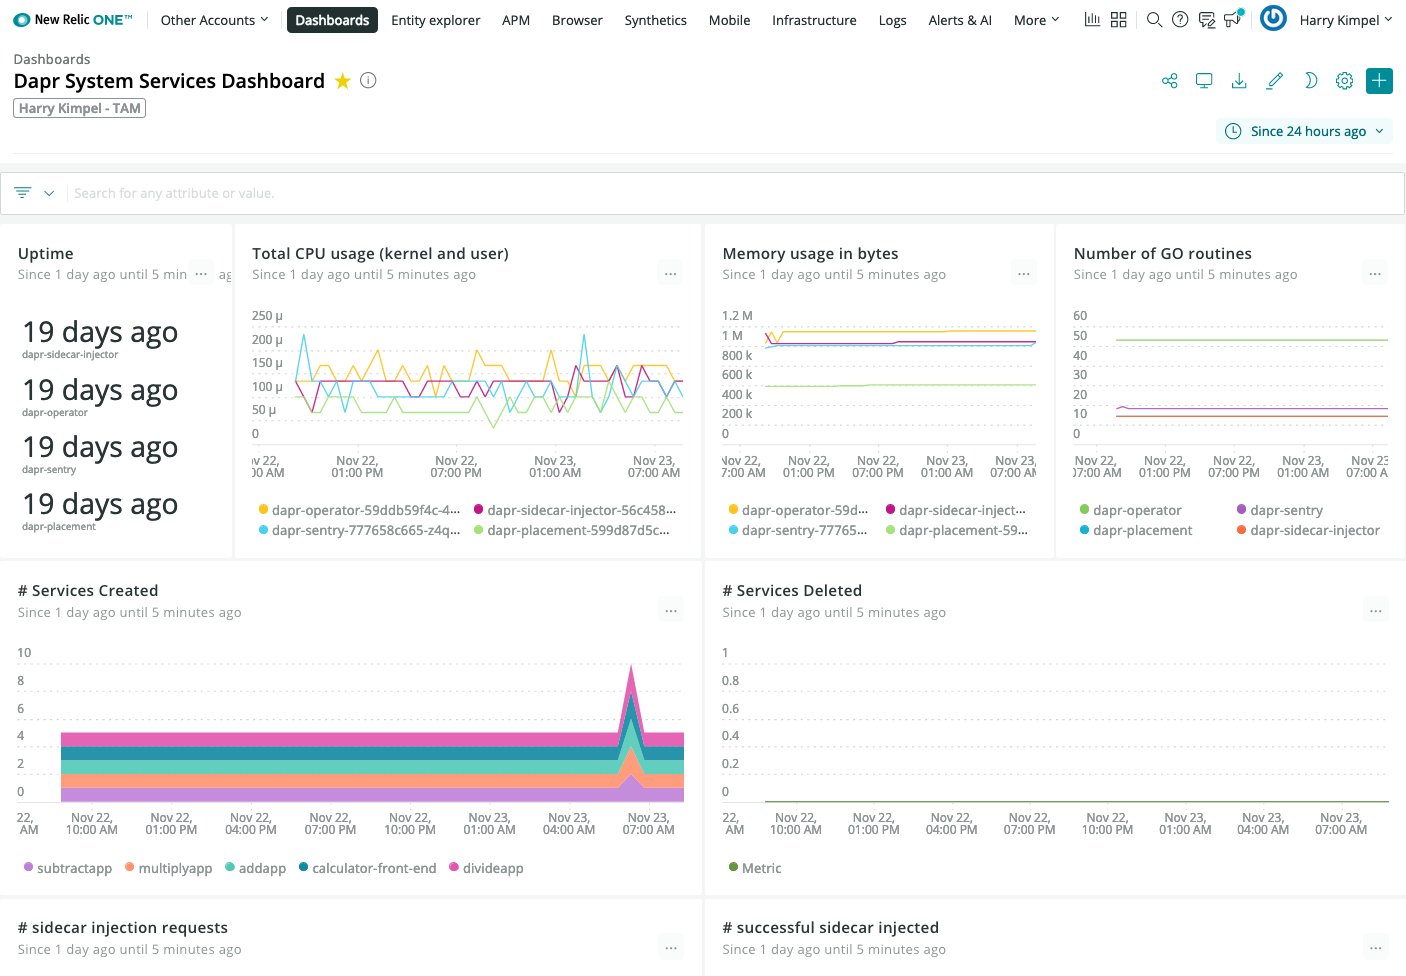 New Relic Dashboard Dapr System Services